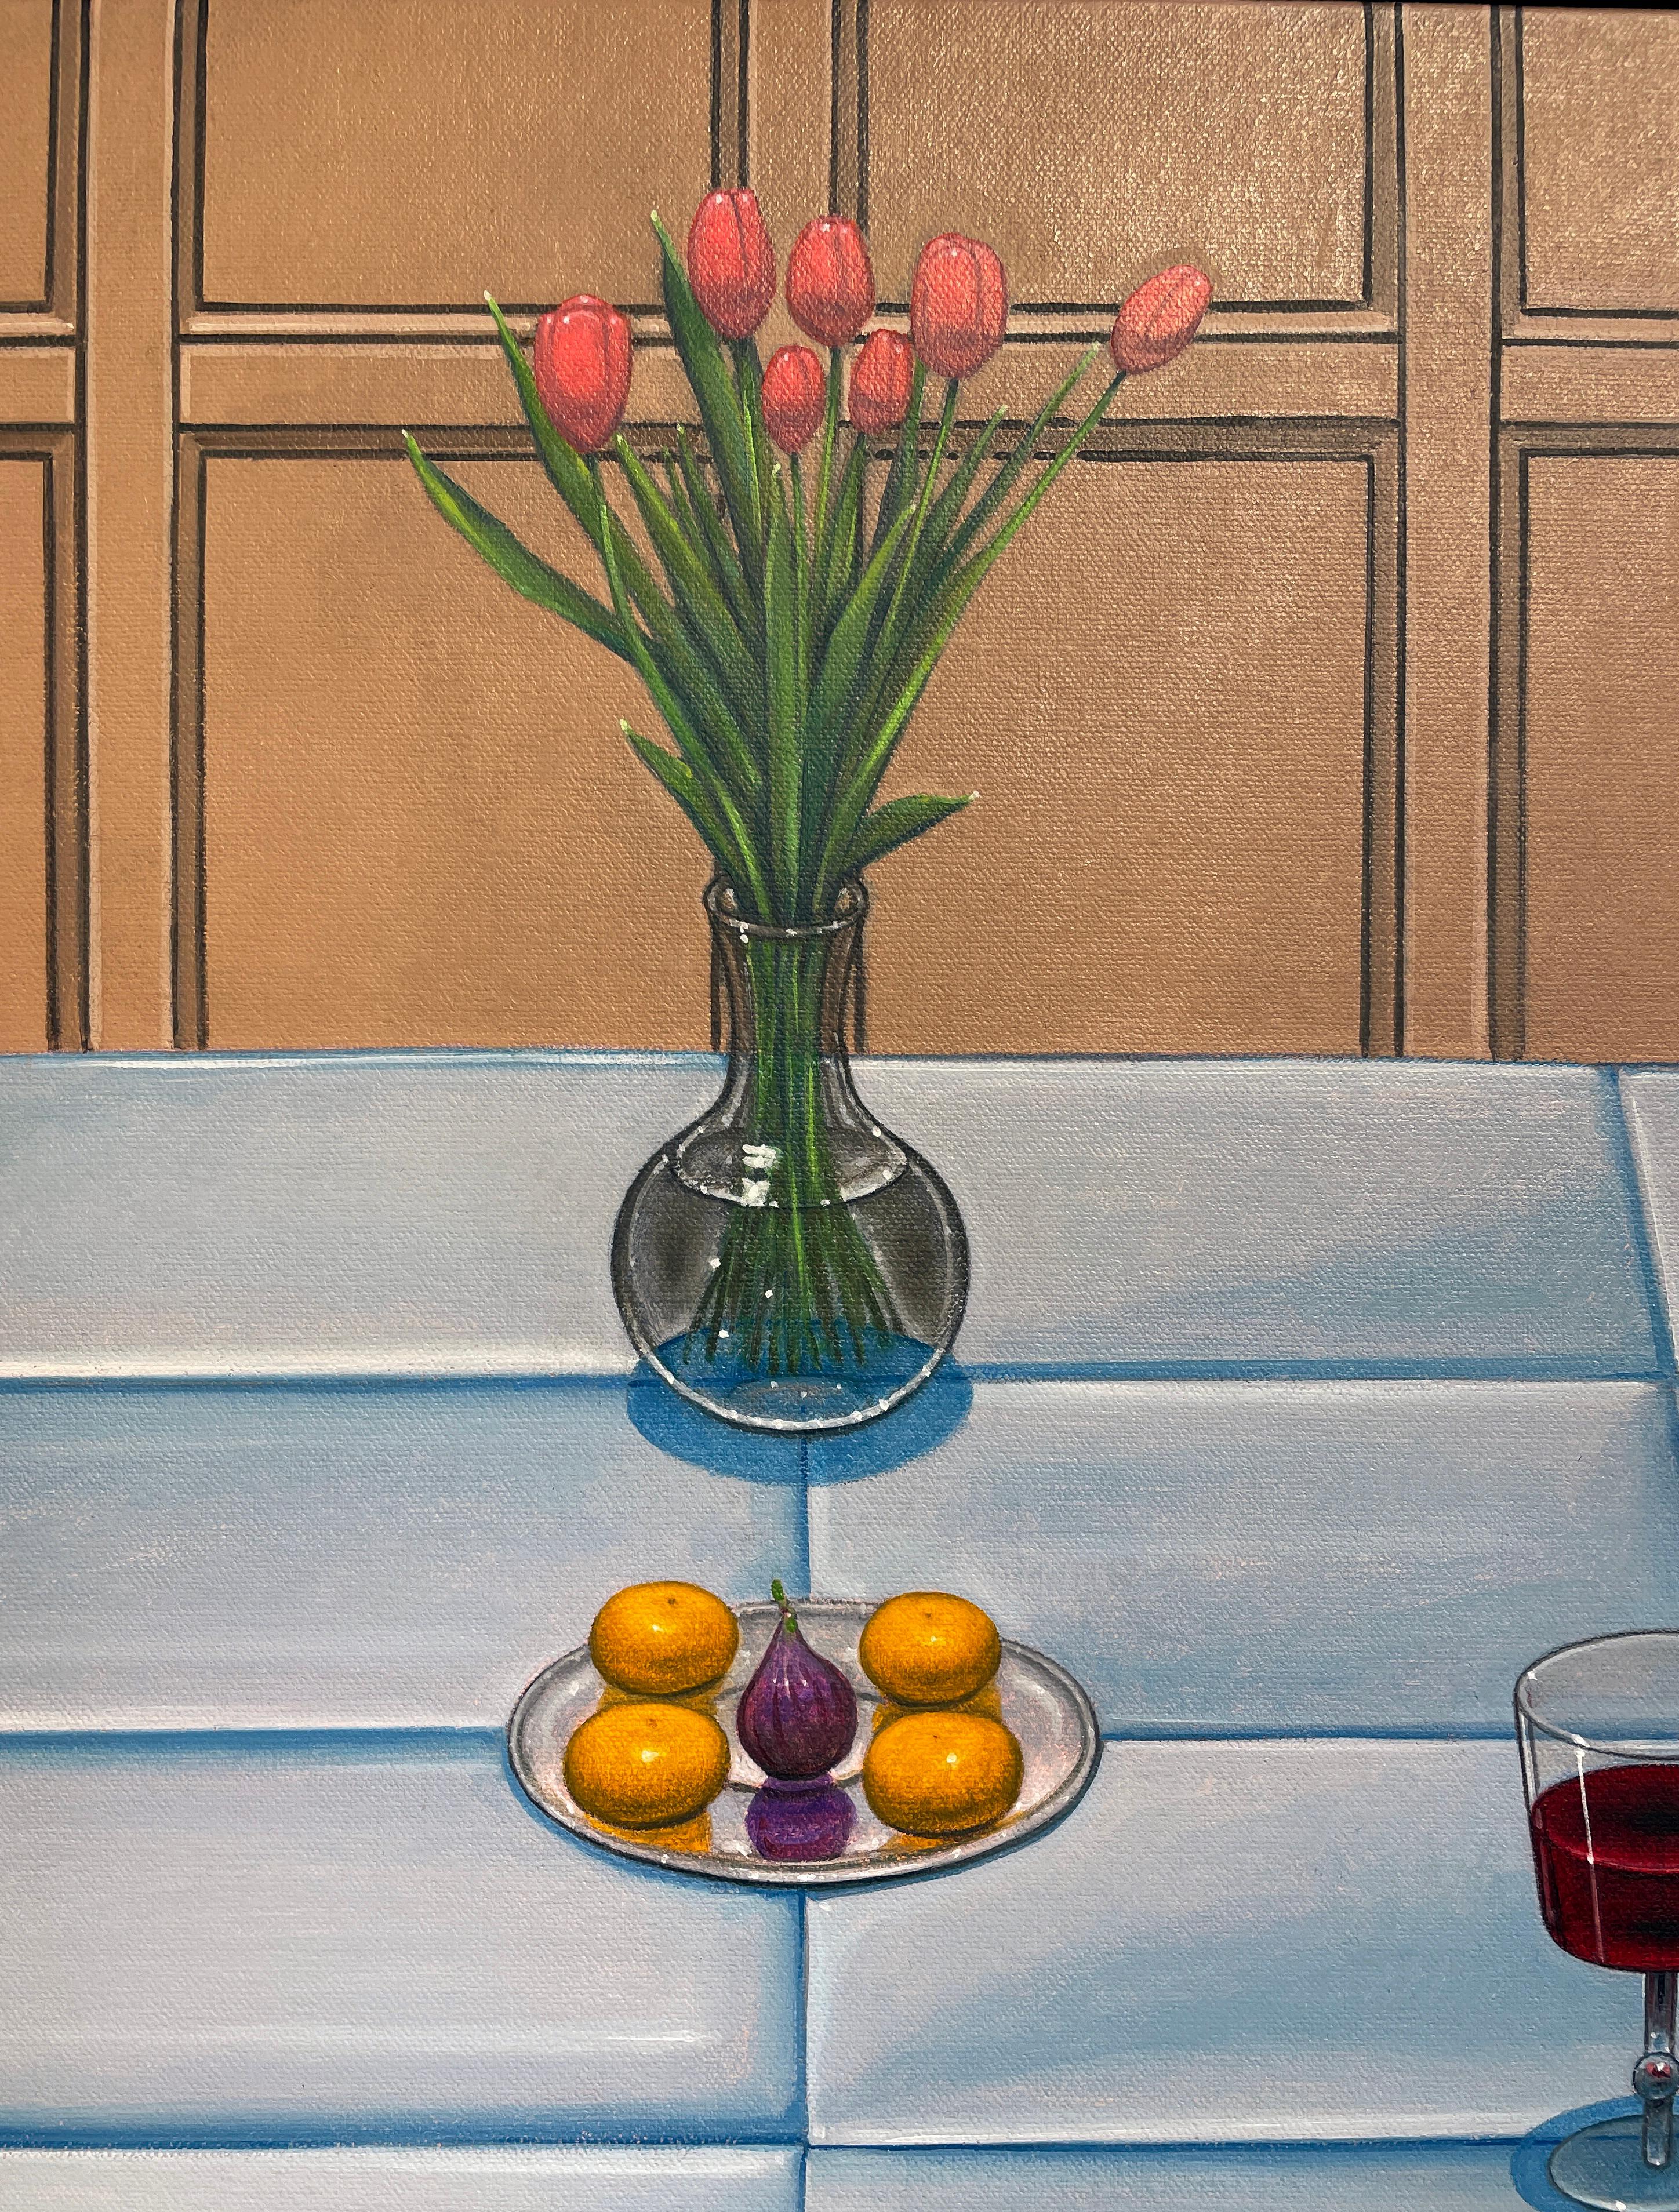 Dessert - Still Life Table Setting with Fruit, Wine and Flowers, Oil on Panel - Surrealist Painting by John Hrehov